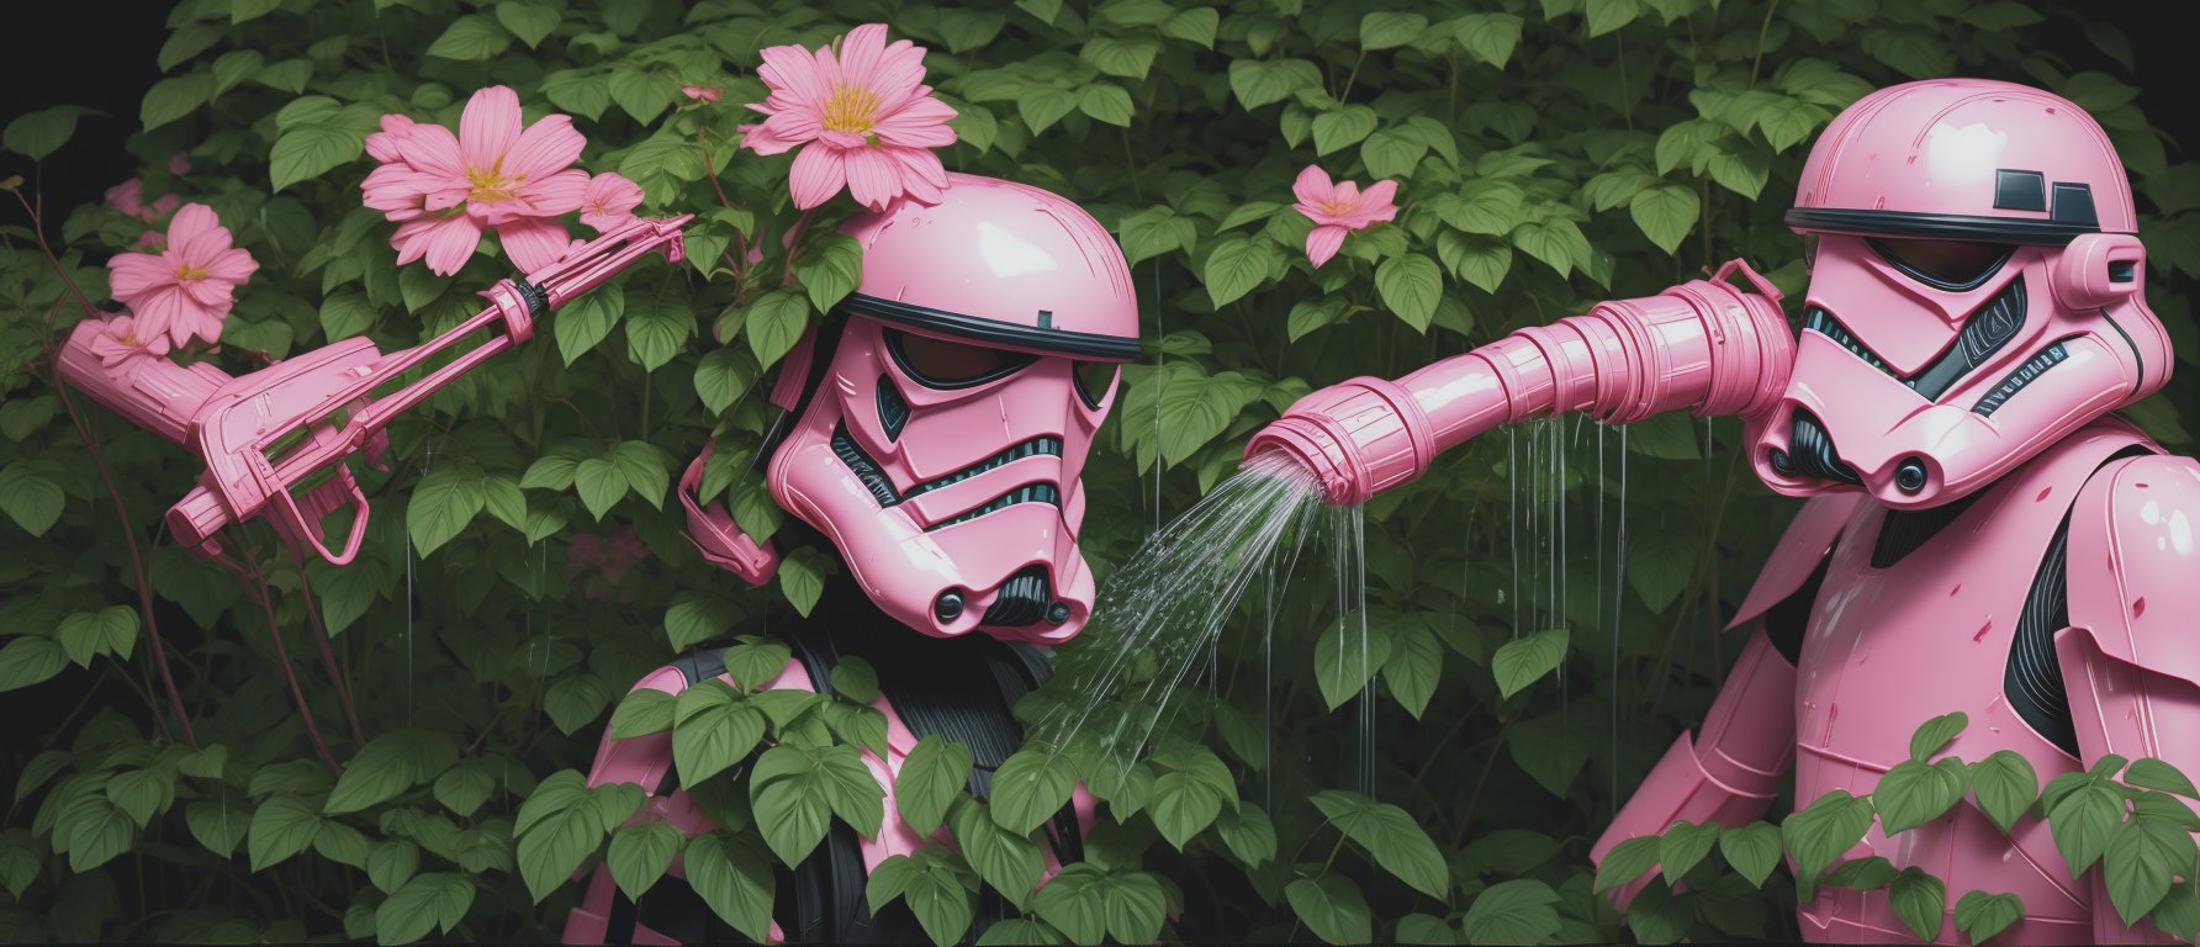 Stormtrooper - by HailoKnight image by braintacles